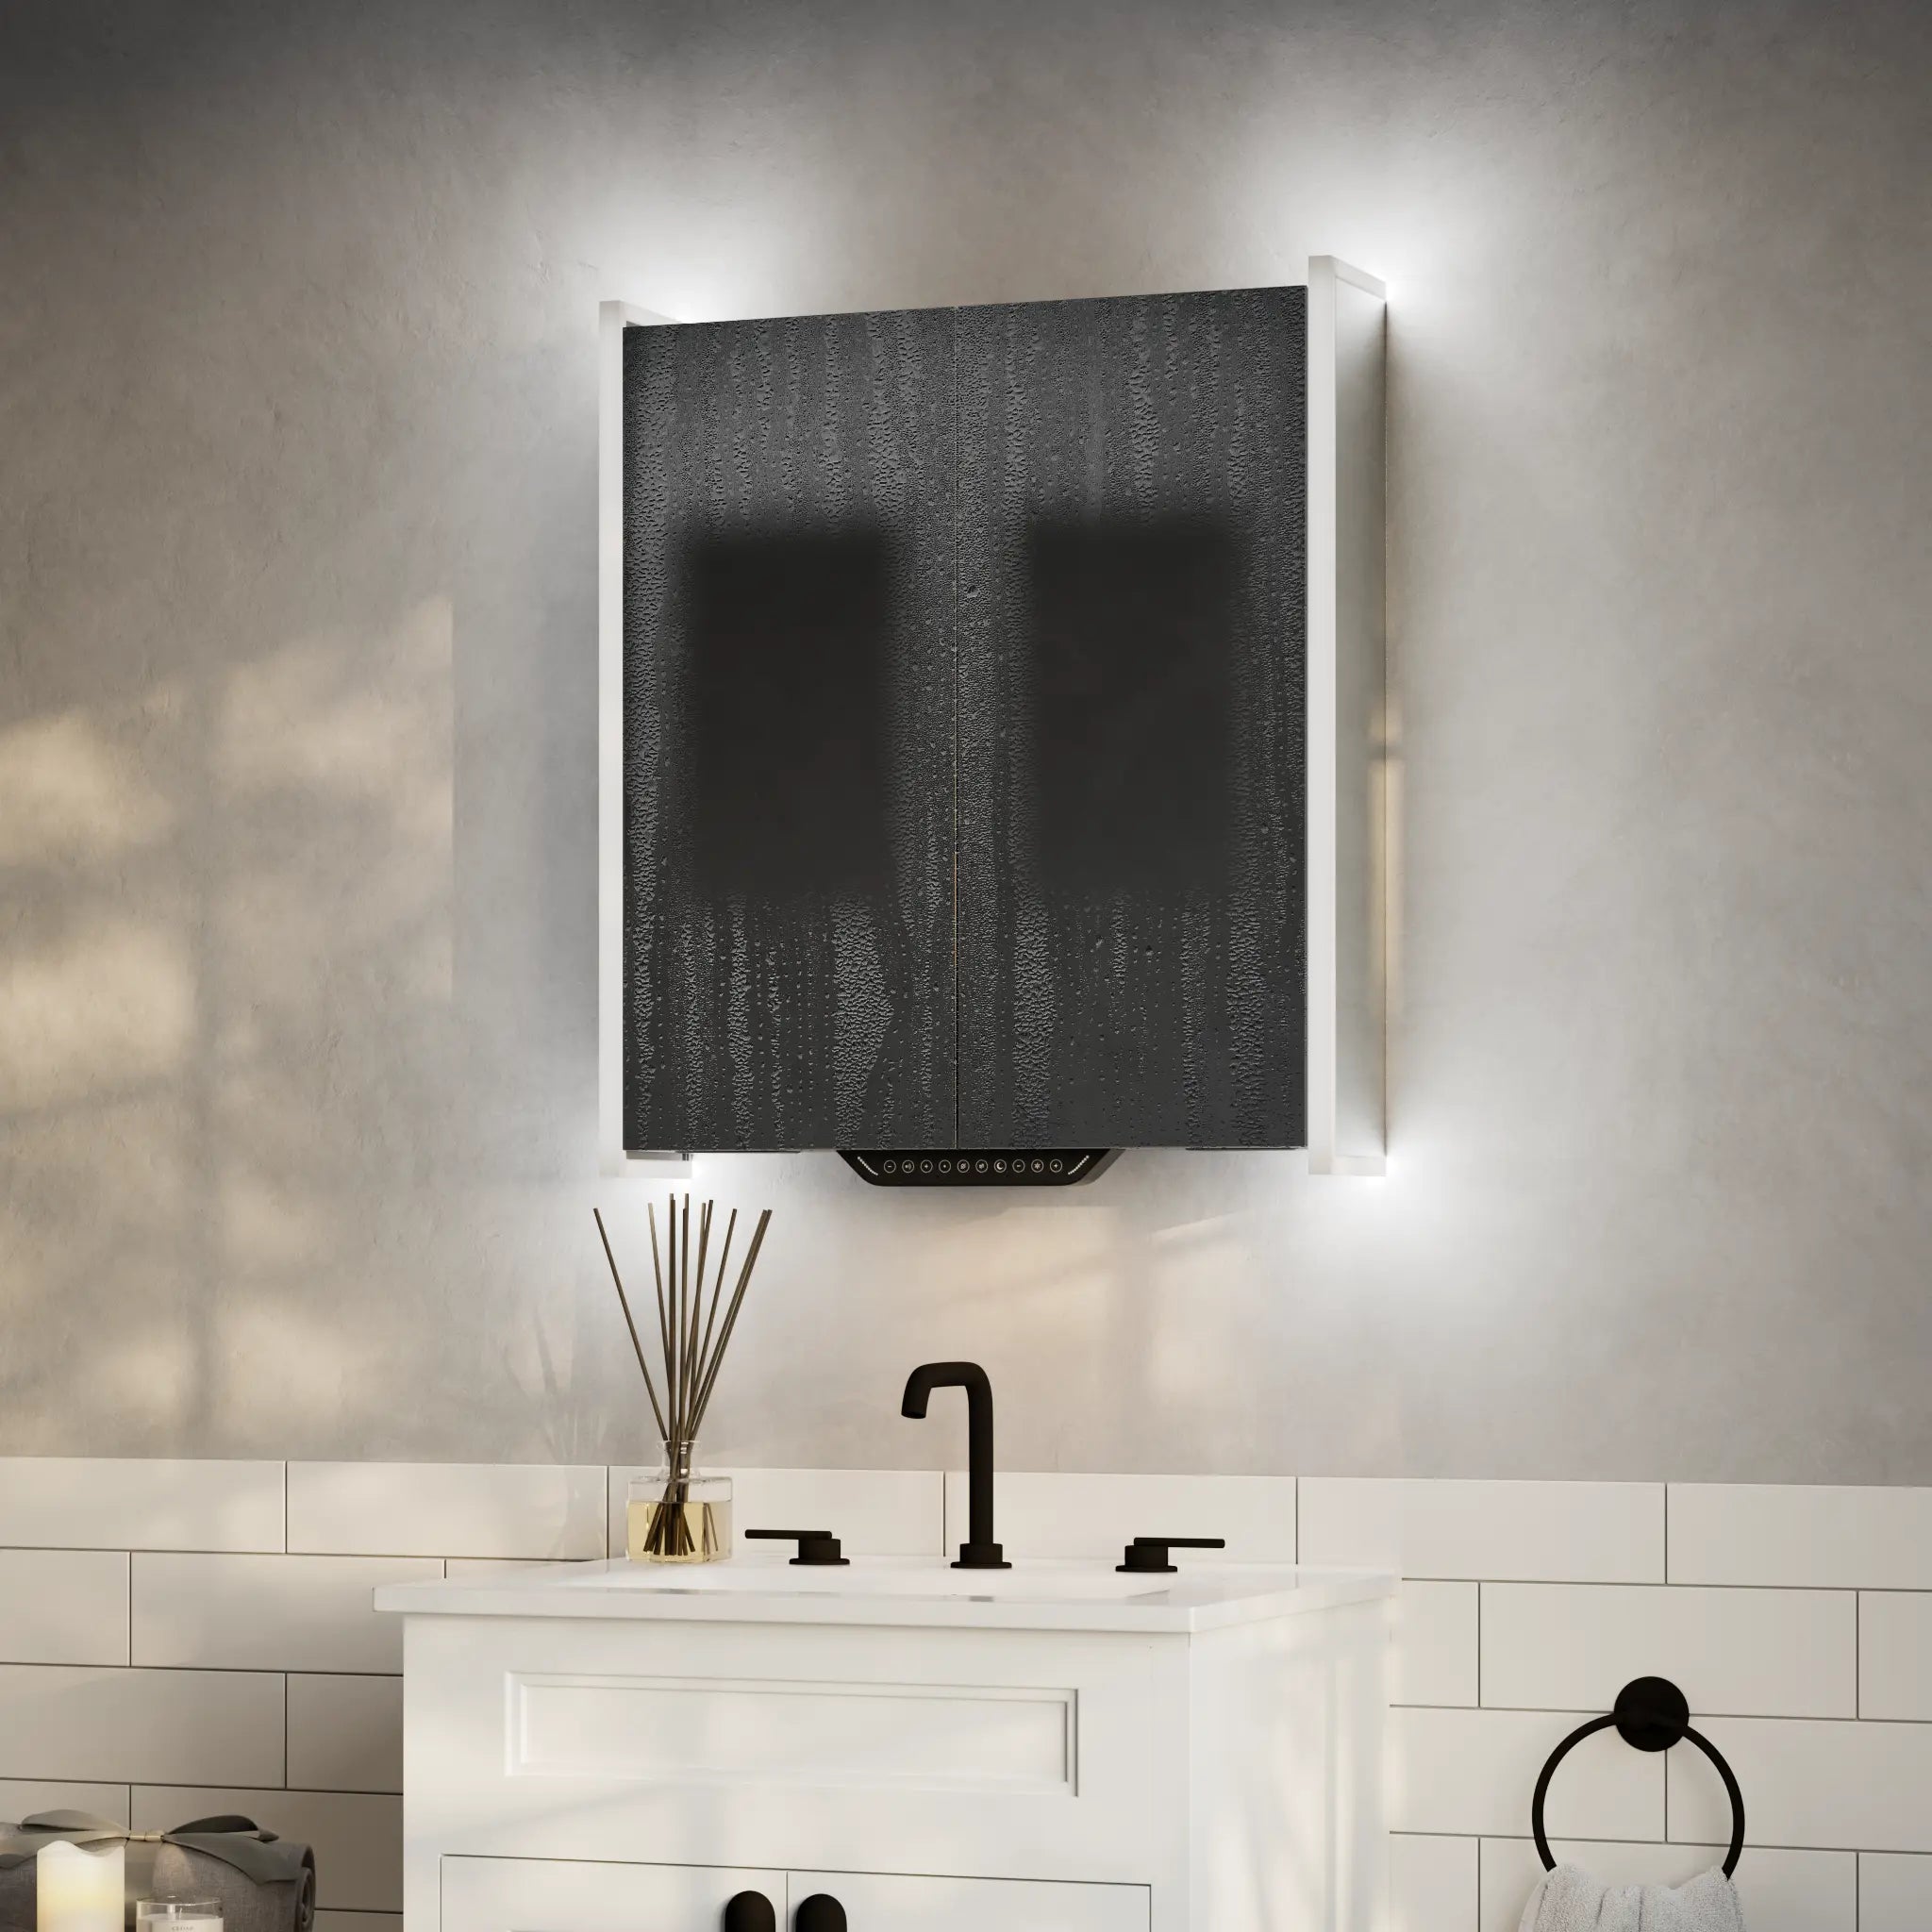 Luka LED Mirror Cabinet with Alexa Built-In